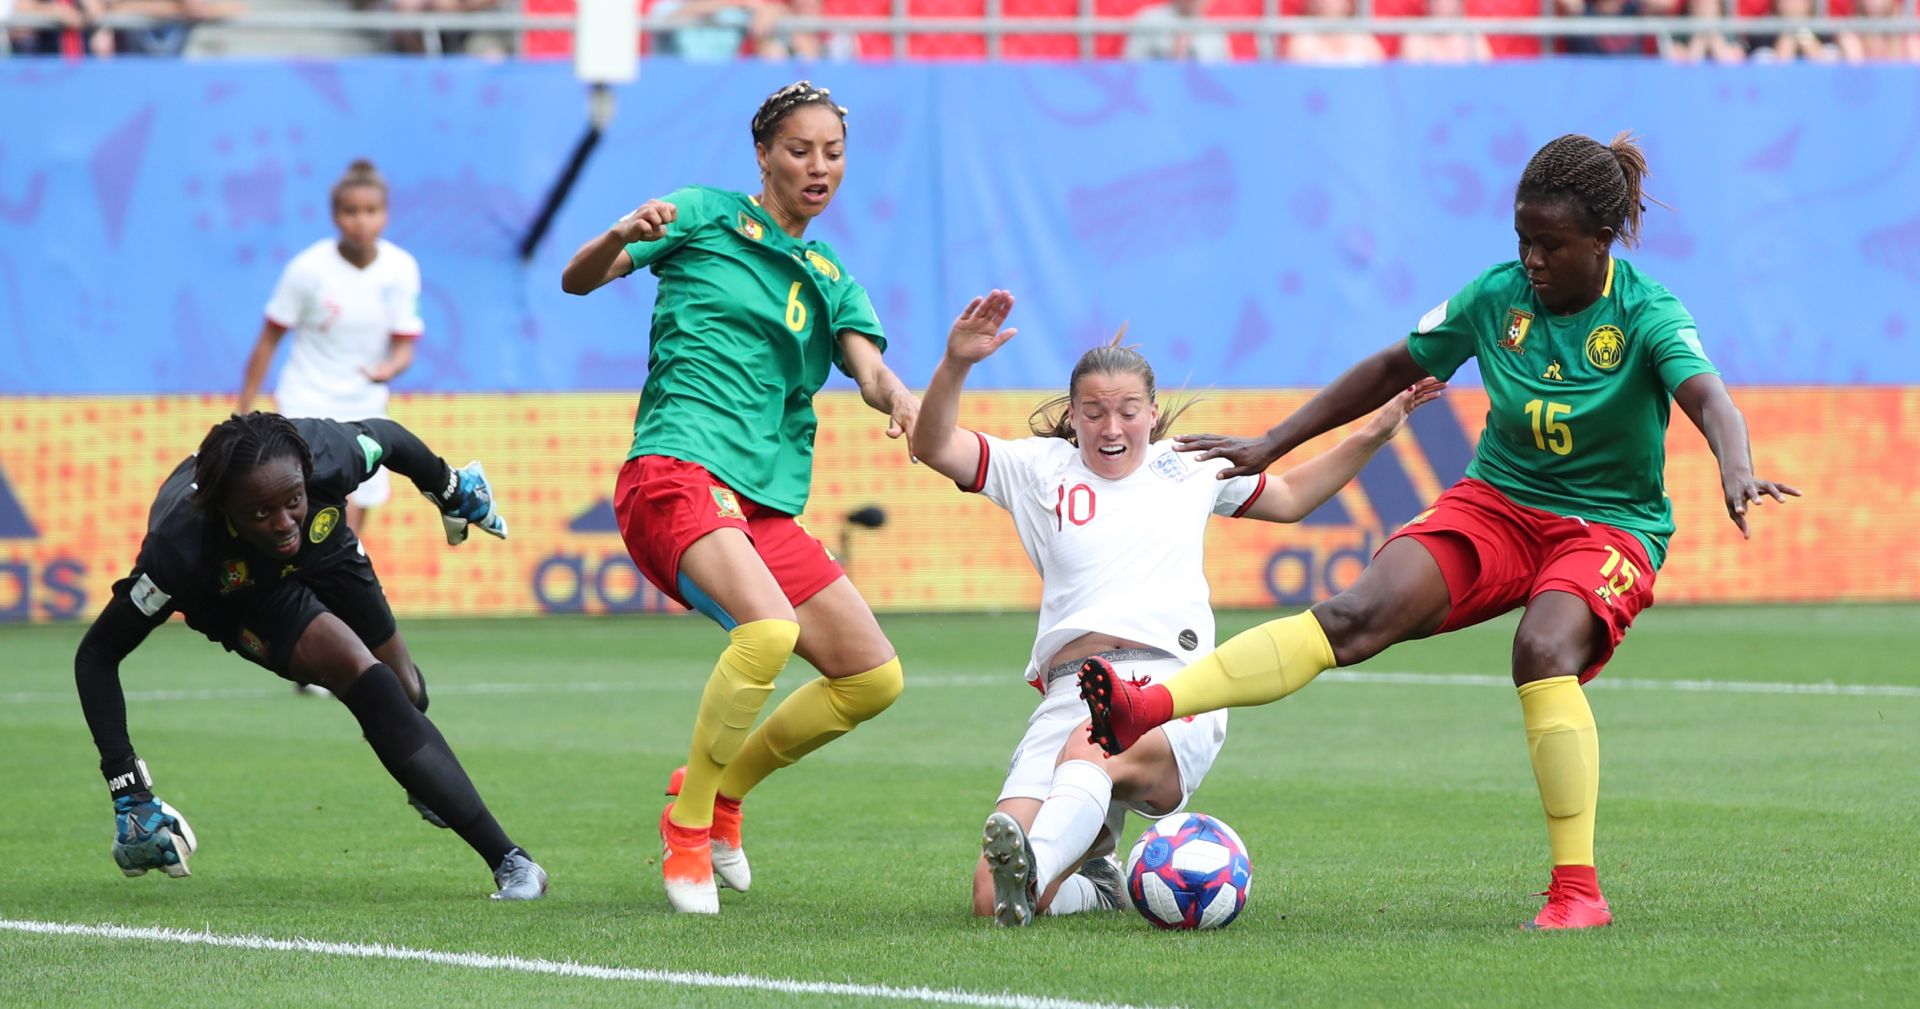 epa07668819 Fran Kirby (2nd-R) of England in action against Ysis Sonkeng (R), Estelle Johnson (2nd-L) and goalkeeper Annette Ngo Ndom (L) of Cameroon during the round of 16 match between England and Cameroon at the FIFA Women's World Cup 2019 in Valenciennes, France, 23 June 2019.  EPA/TOLGA BOZOGLU